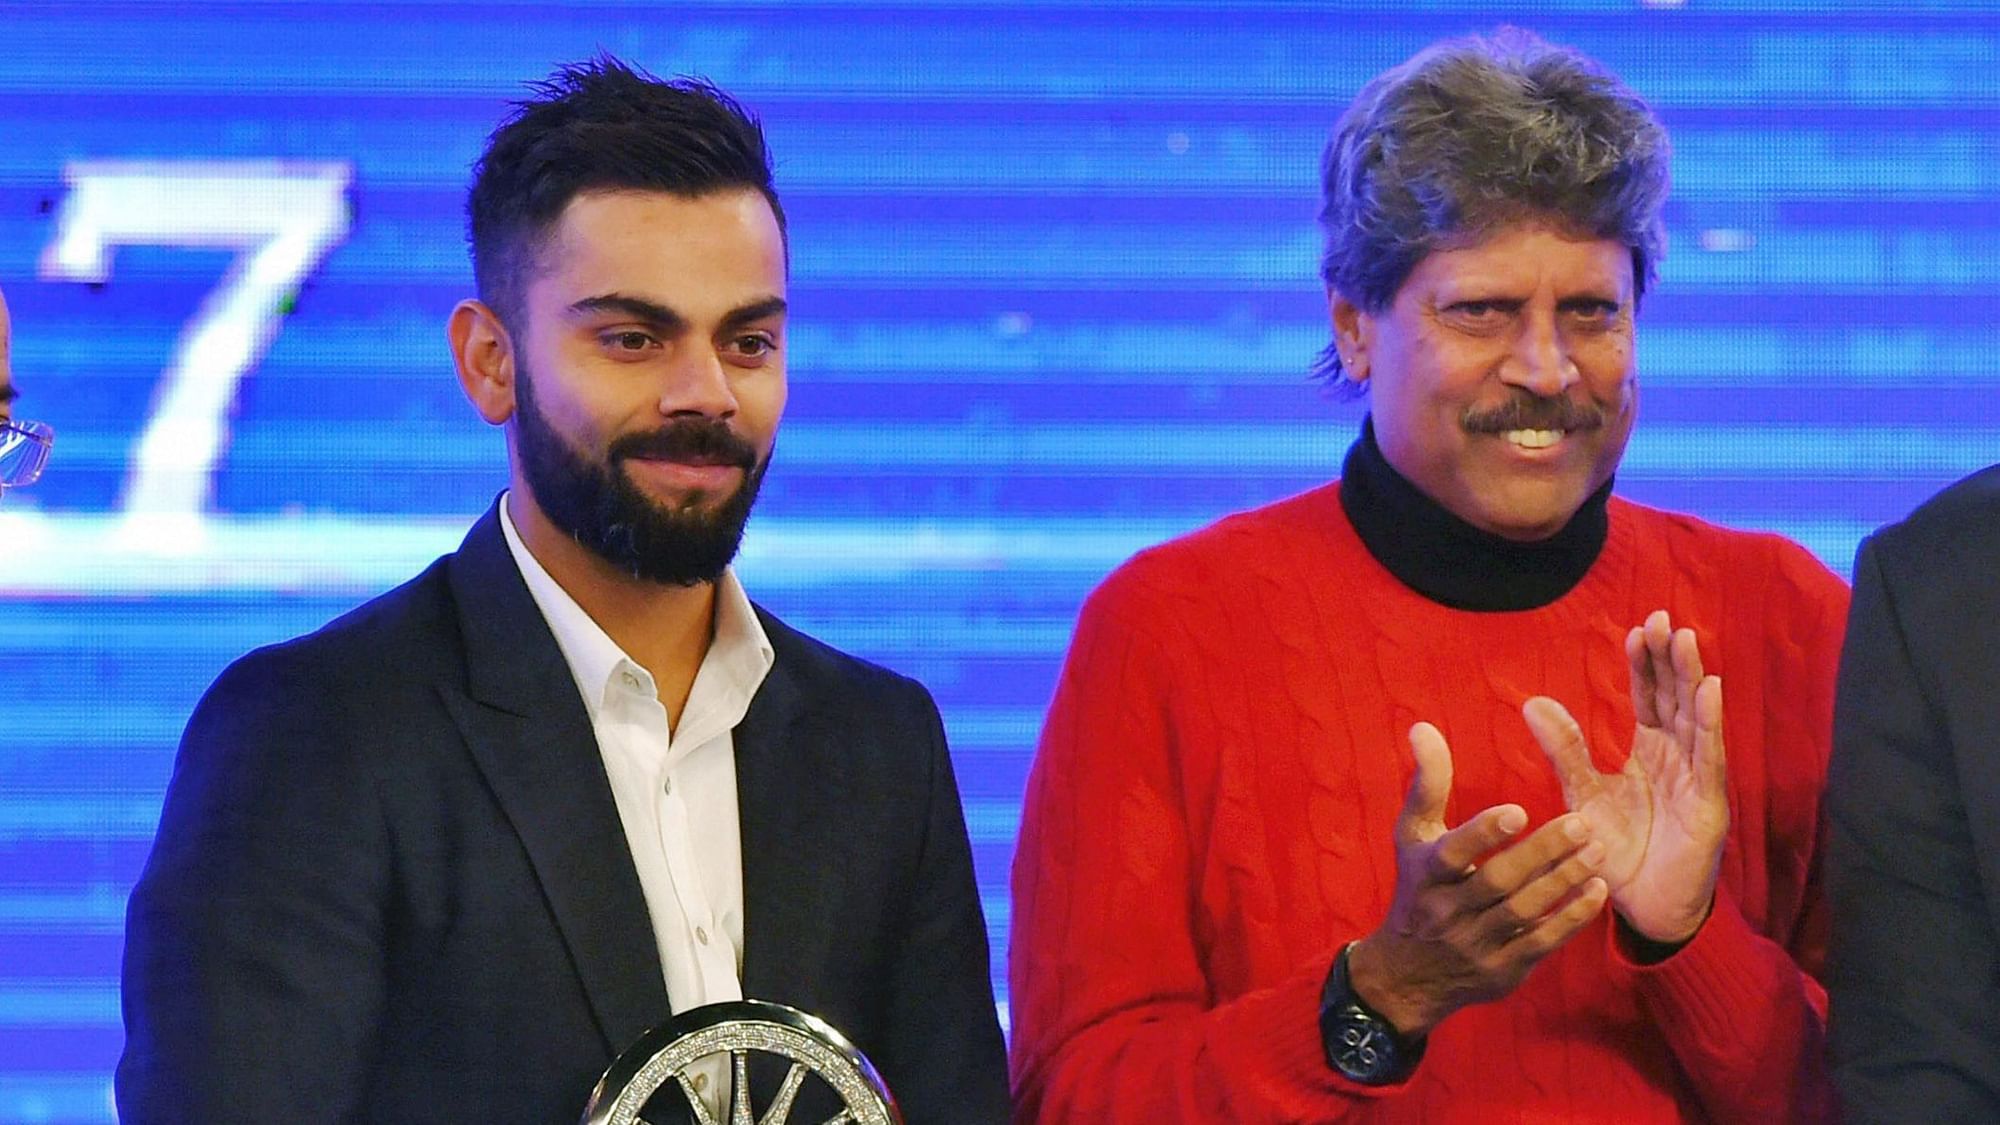 Kapil Dev has said Virat Kohli needs to practise more since he’s crossed 30 now and reflexes do become slower.